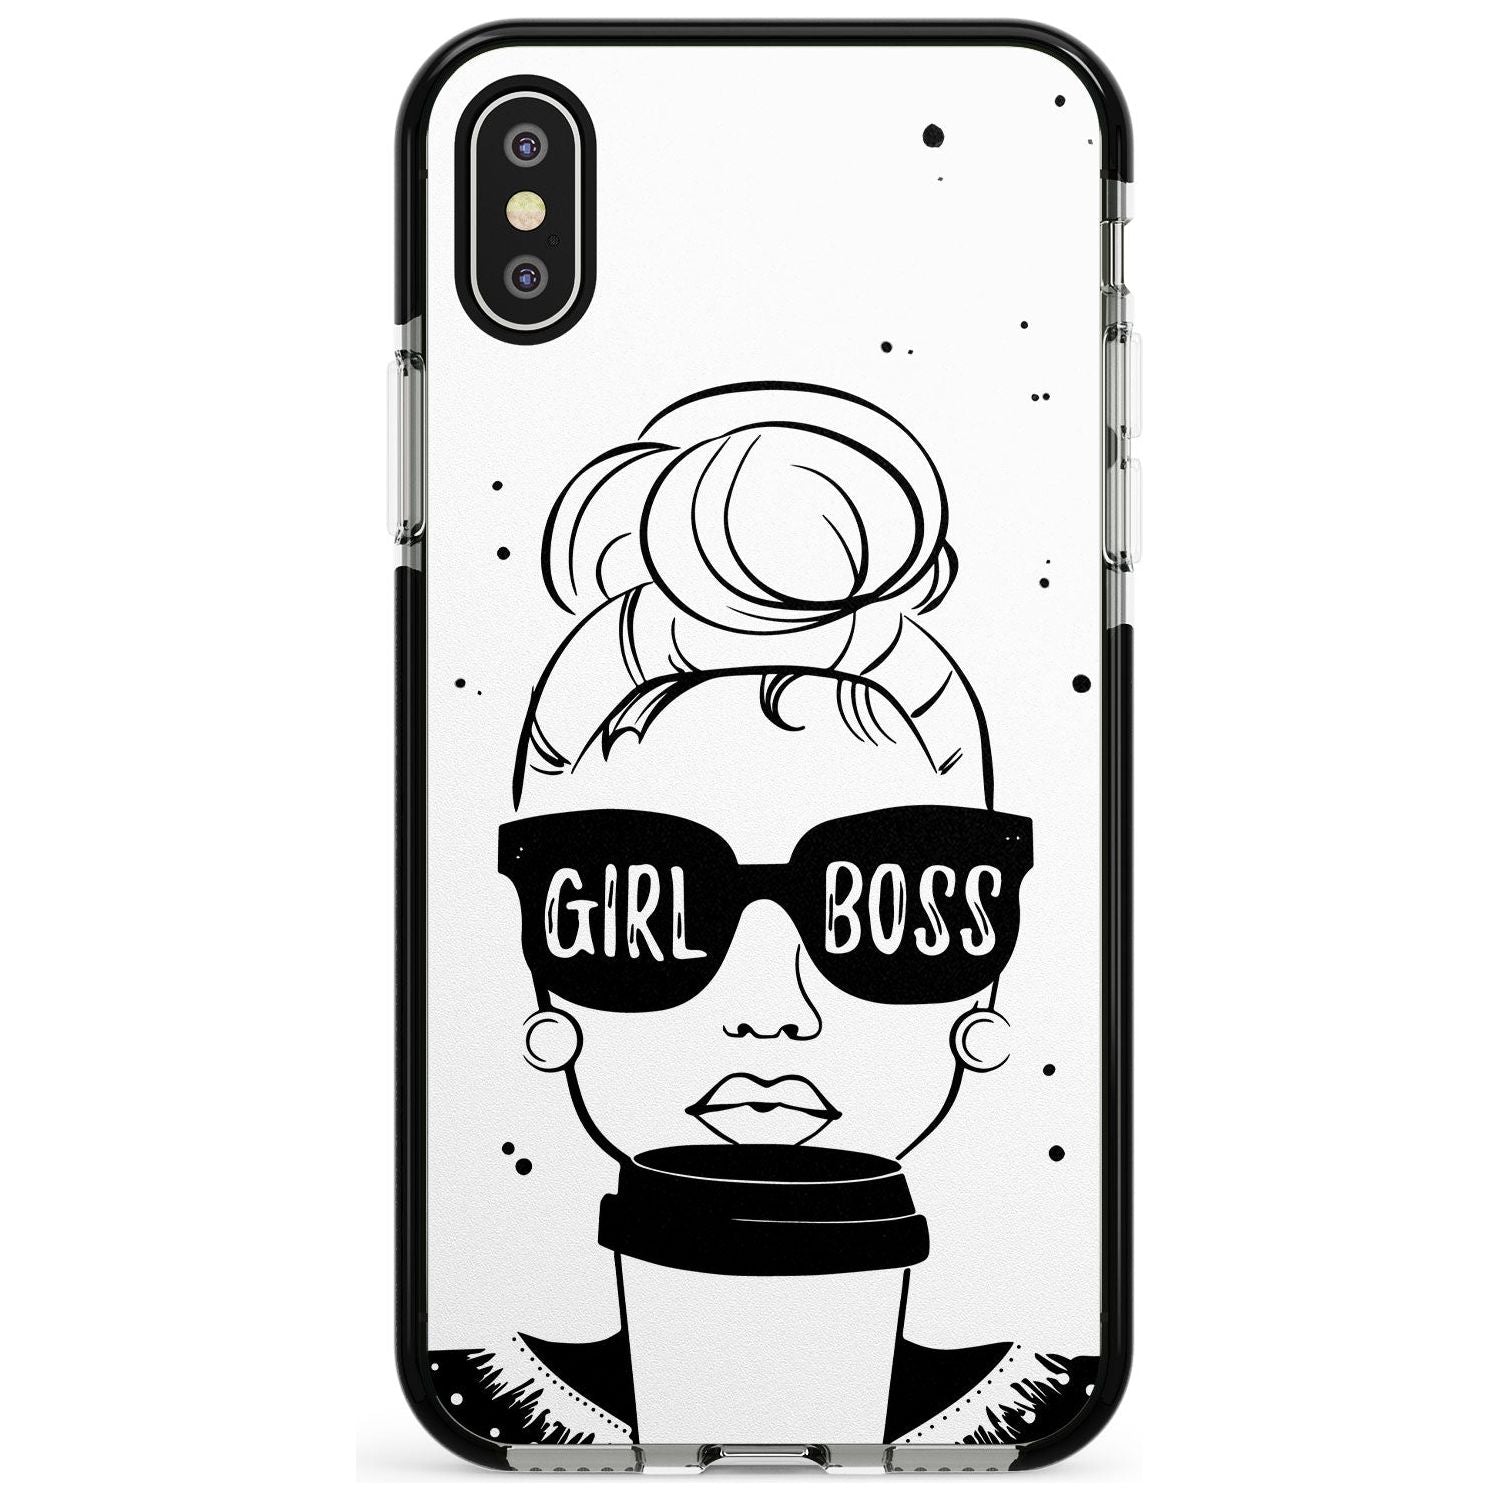 Girl Boss Black Impact Phone Case for iPhone X XS Max XR